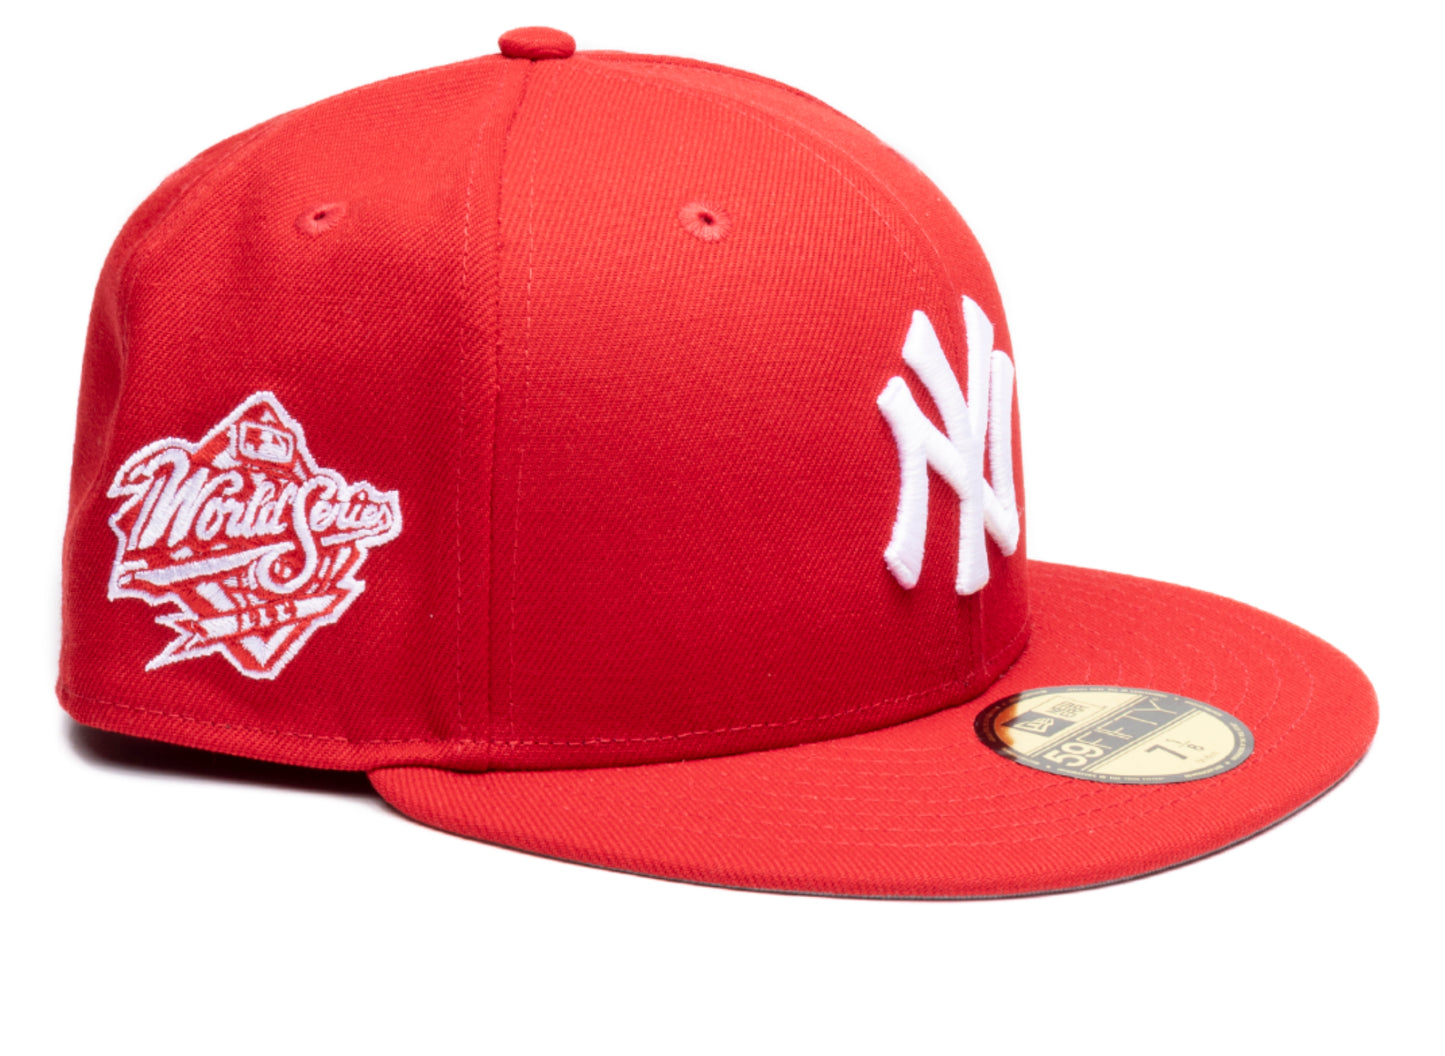 New Era New York Yankees Side Patch Fitted Hat